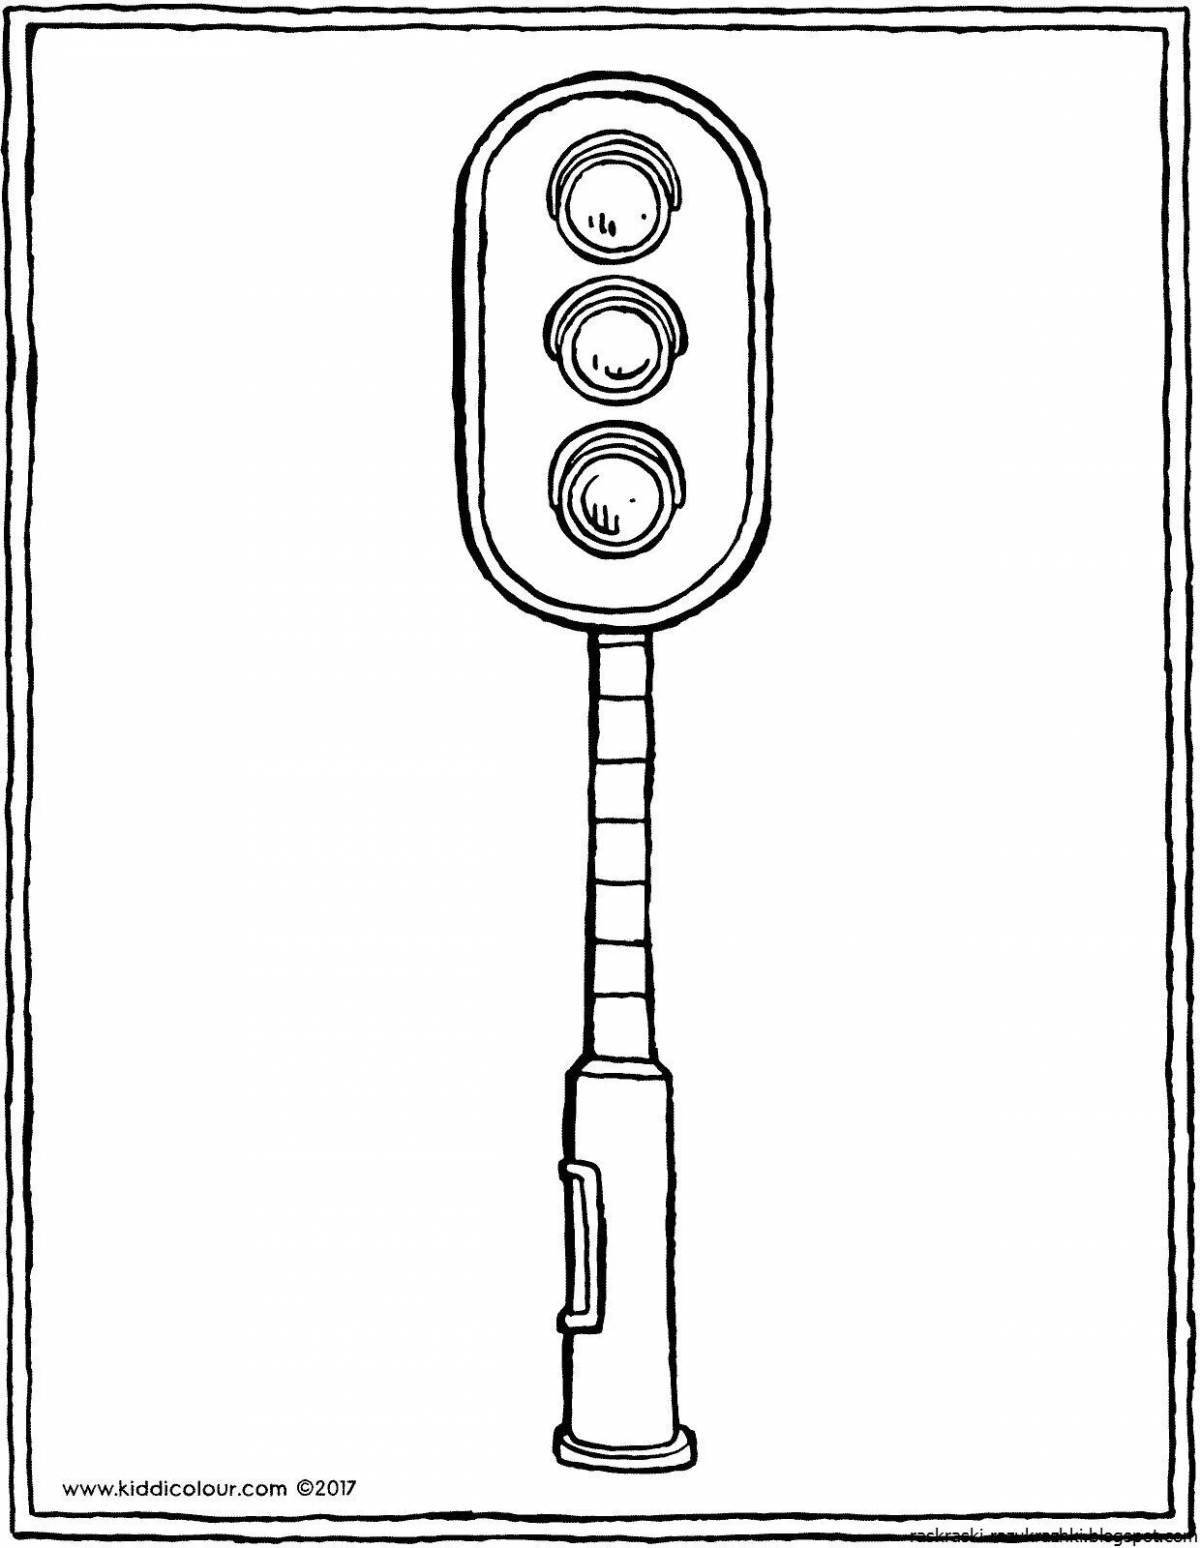 Glorious traffic light coloring page